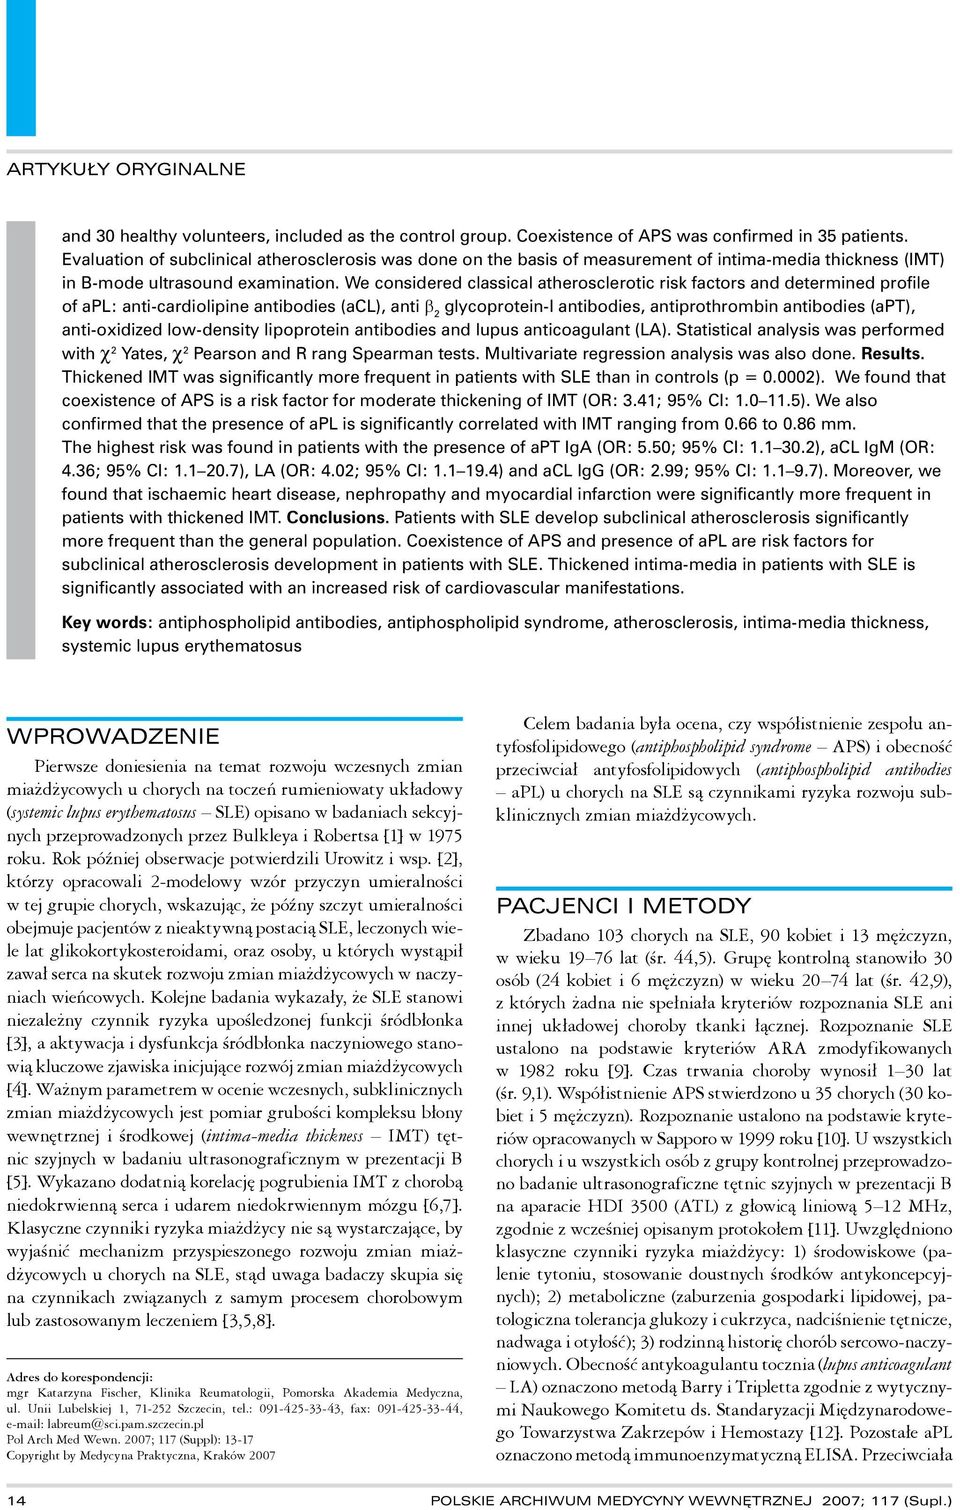 We considered classical atherosclerotic risk factors and determined profile of apl: anti-cardiolipine antibodies (acl), anti β 2 glycoprotein-i antibodies, antiprothrombin antibodies (apt),